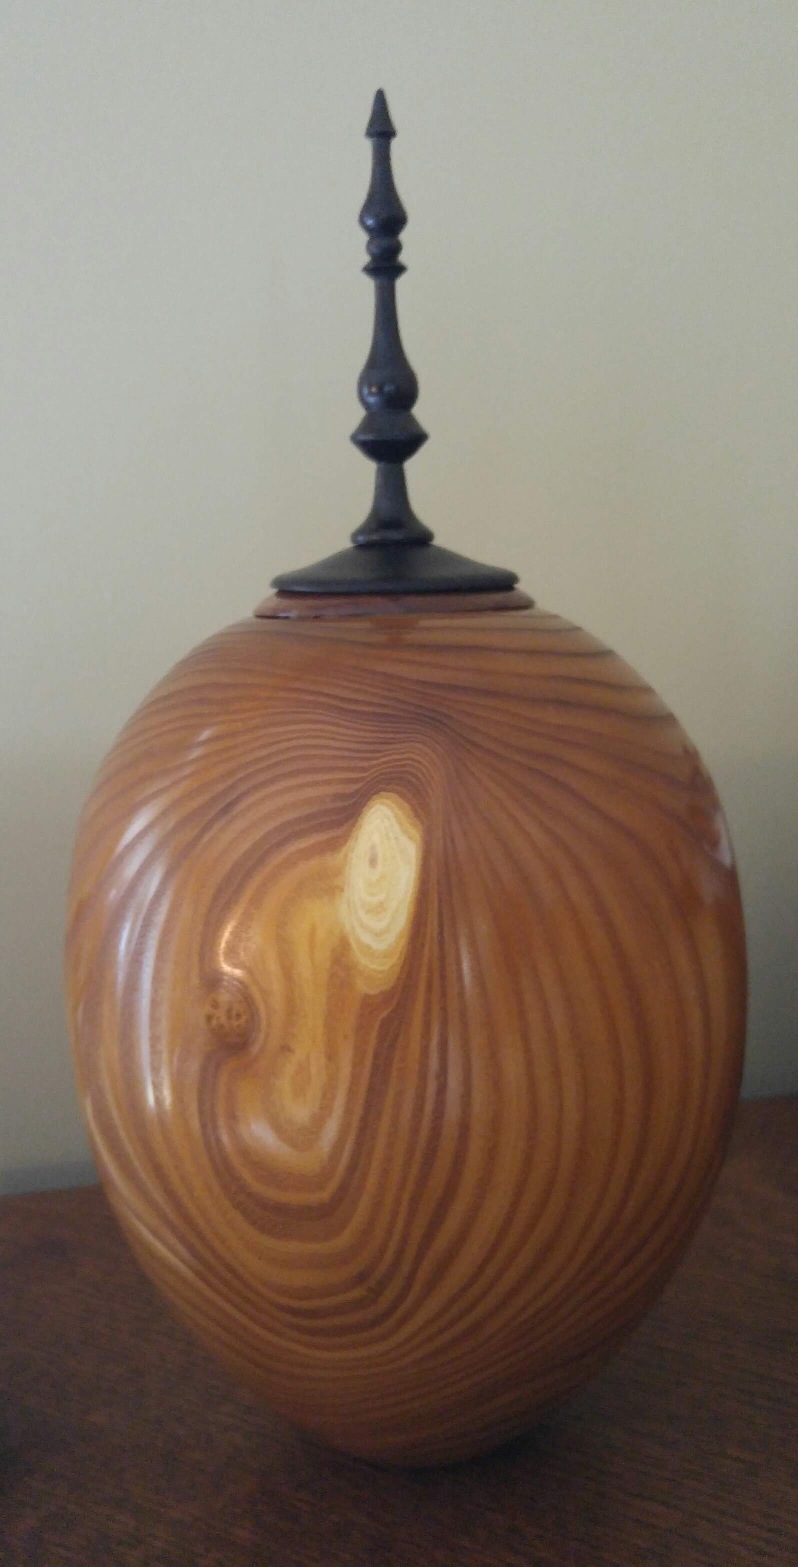 Urn for a friend